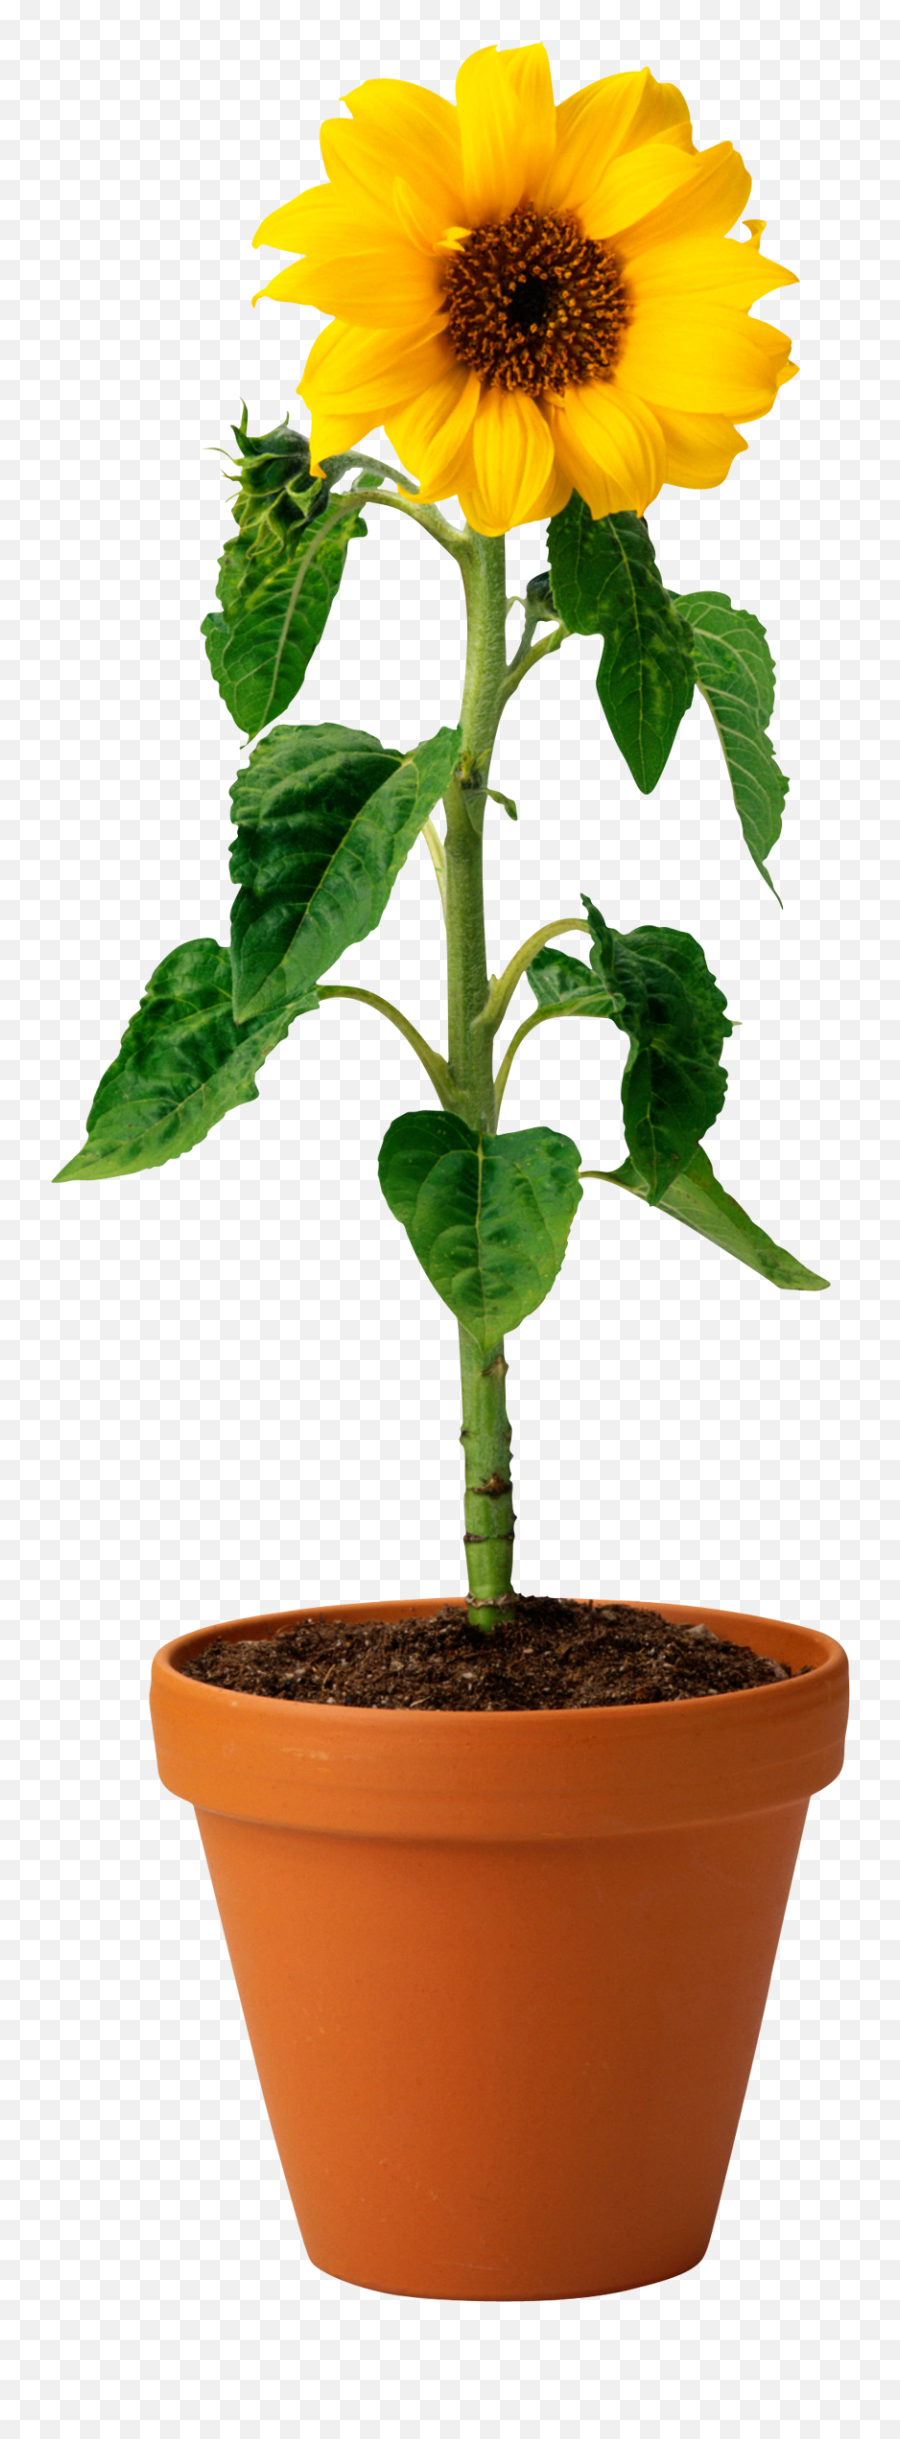 Sunflower Seed And Oil Png Photo - Real Sunflower In Pot,Flower Pot Png